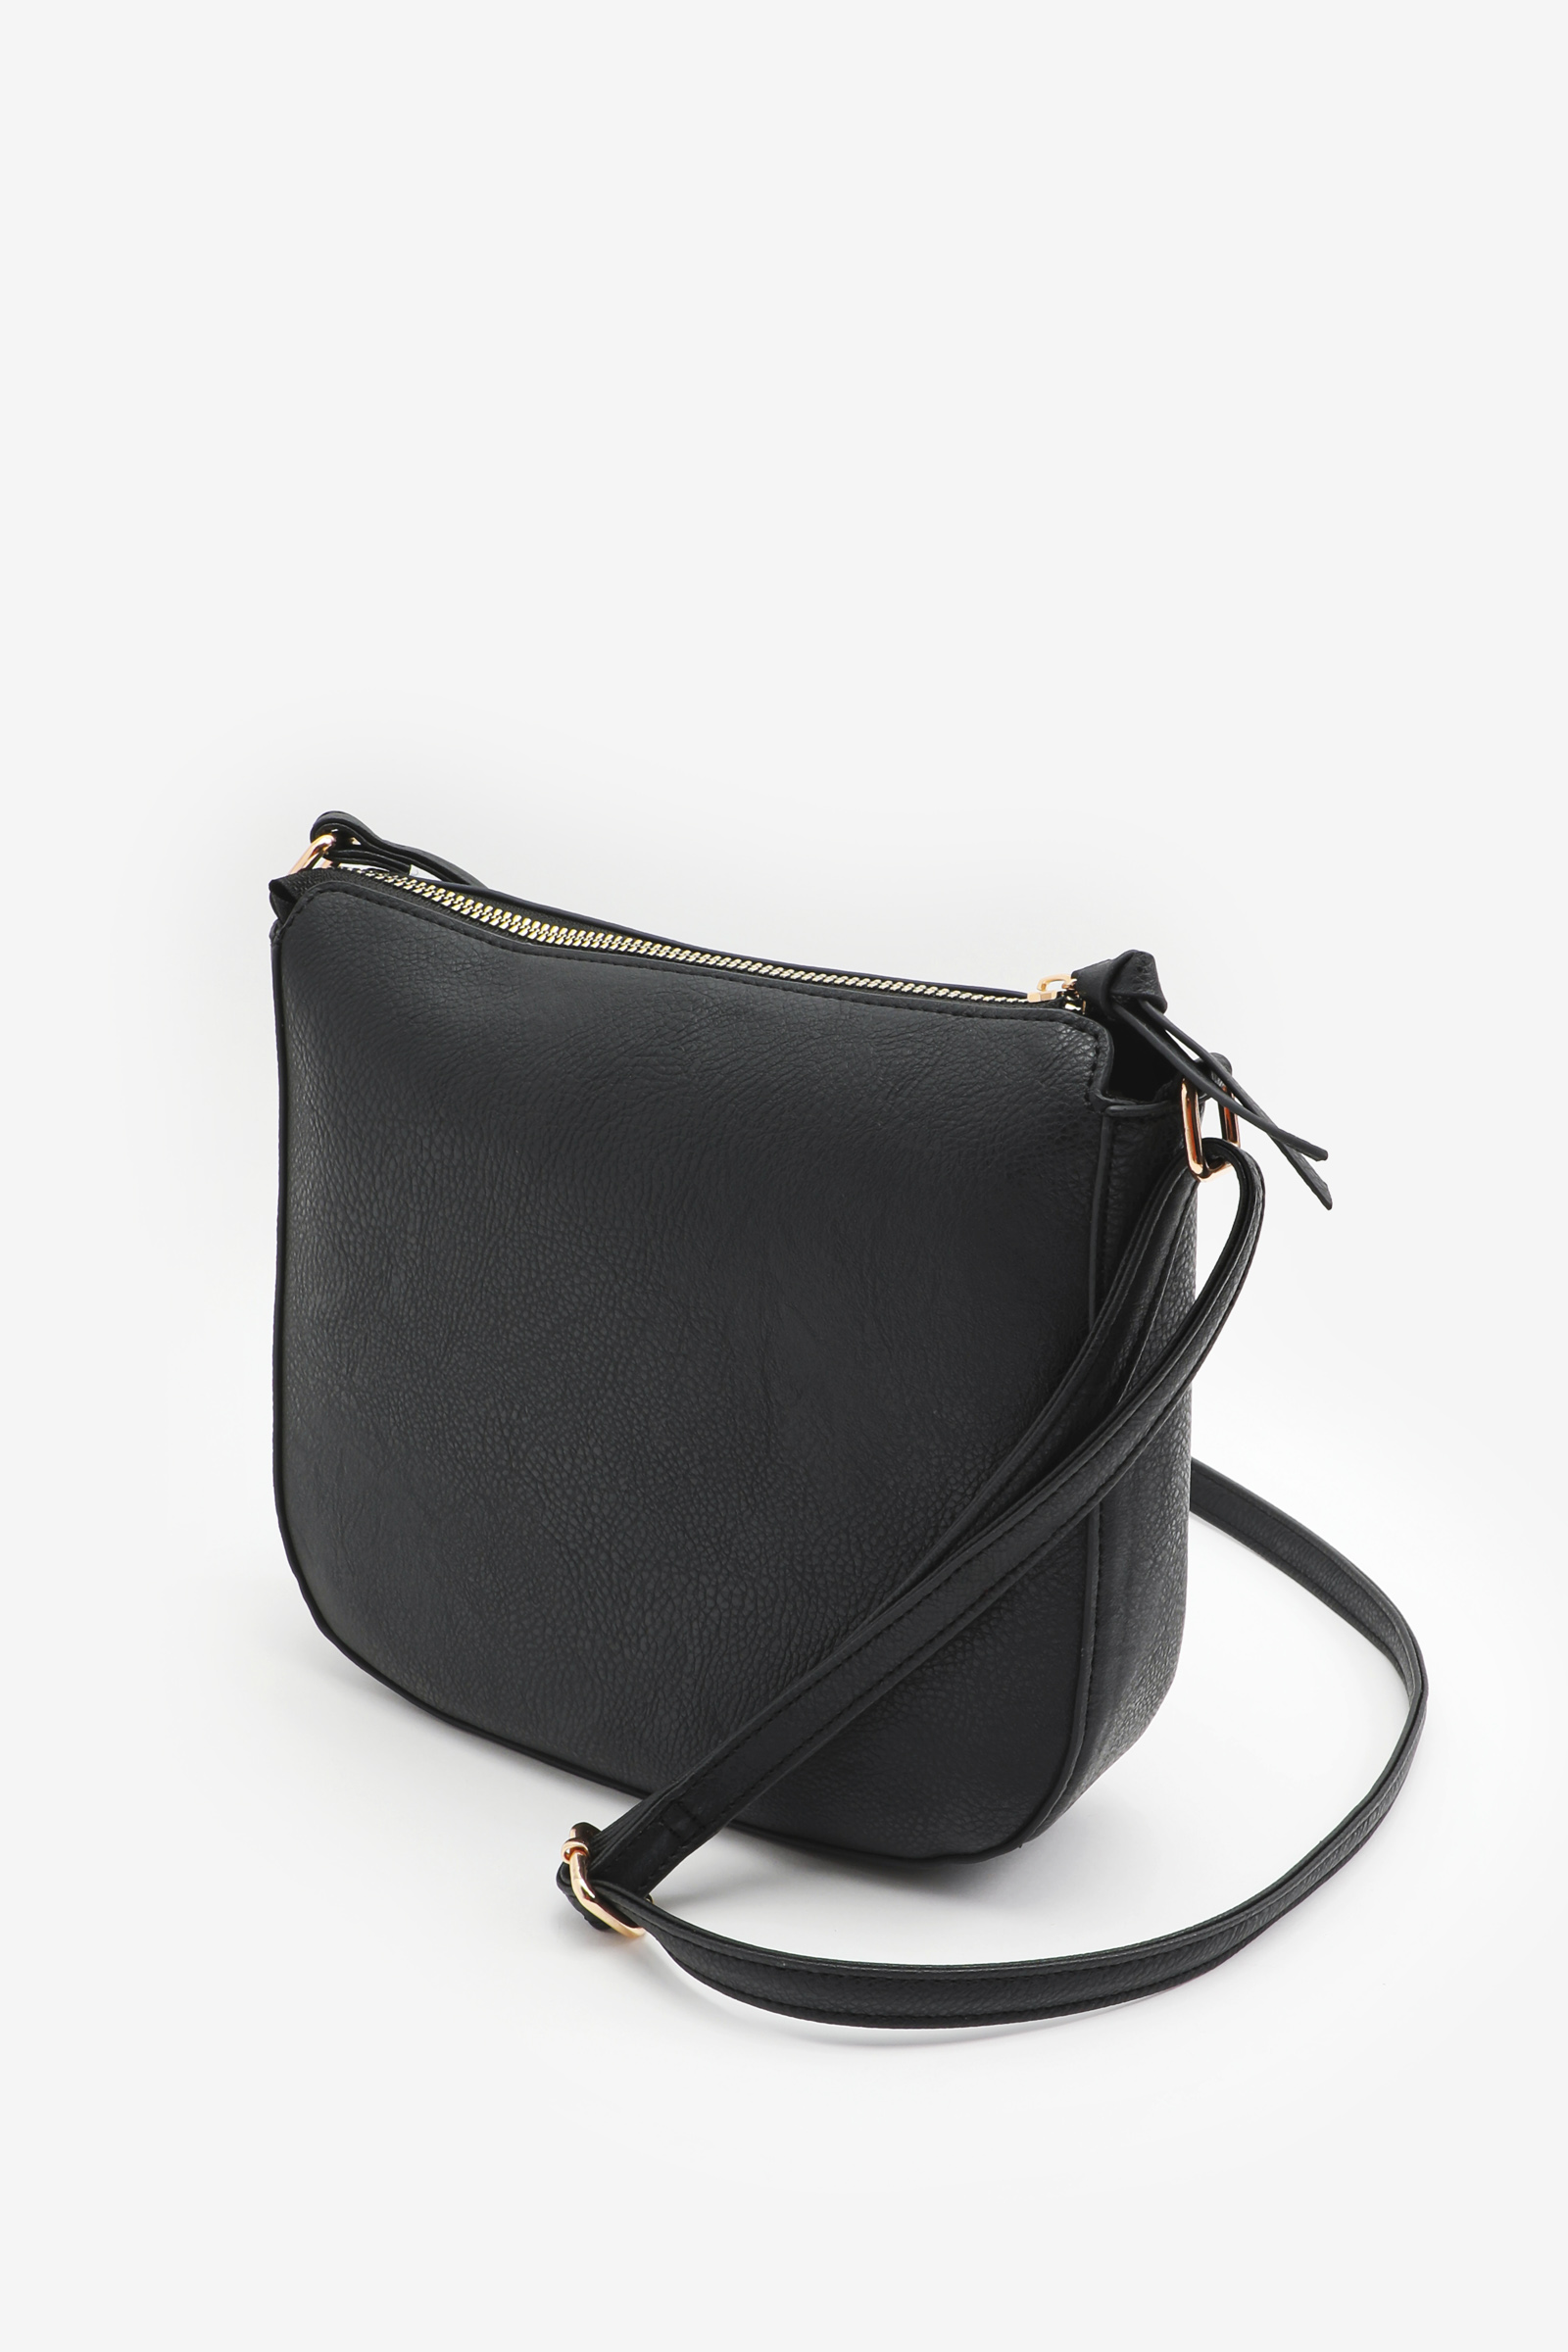 Square Crossbody Bag with front pocket